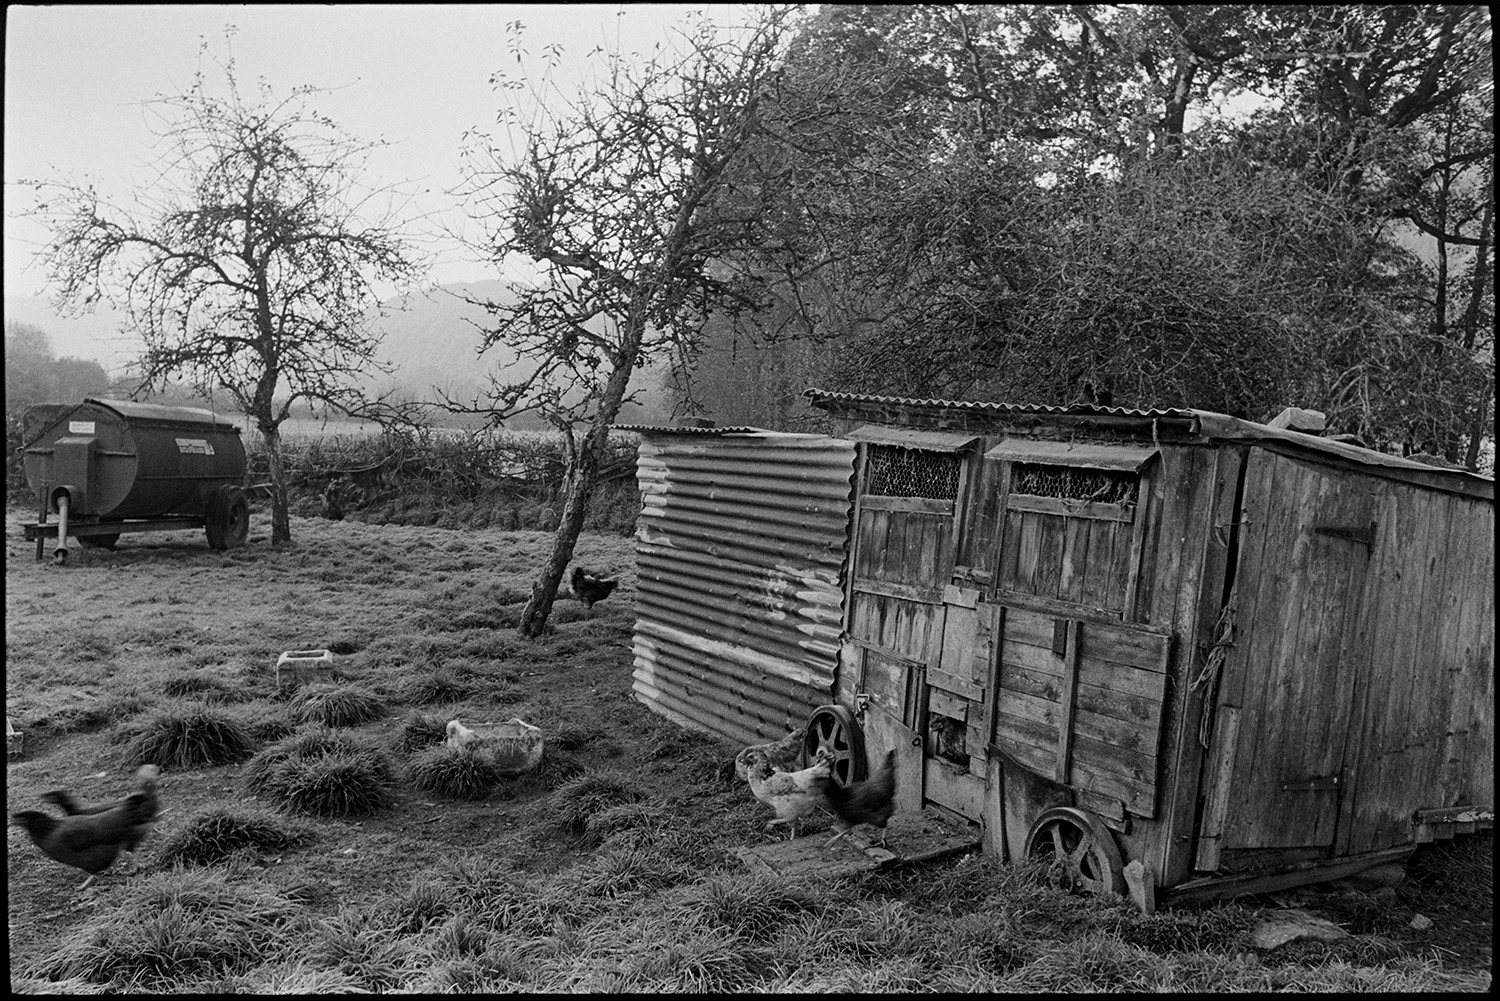 Woman farmer feeding poultry in orchard, dog. 
[Chickens outside a wooden hen house with wheels in a orchard at Cawseys Meethe, Kings Nympton. A muck spreader can be seen in the background.]